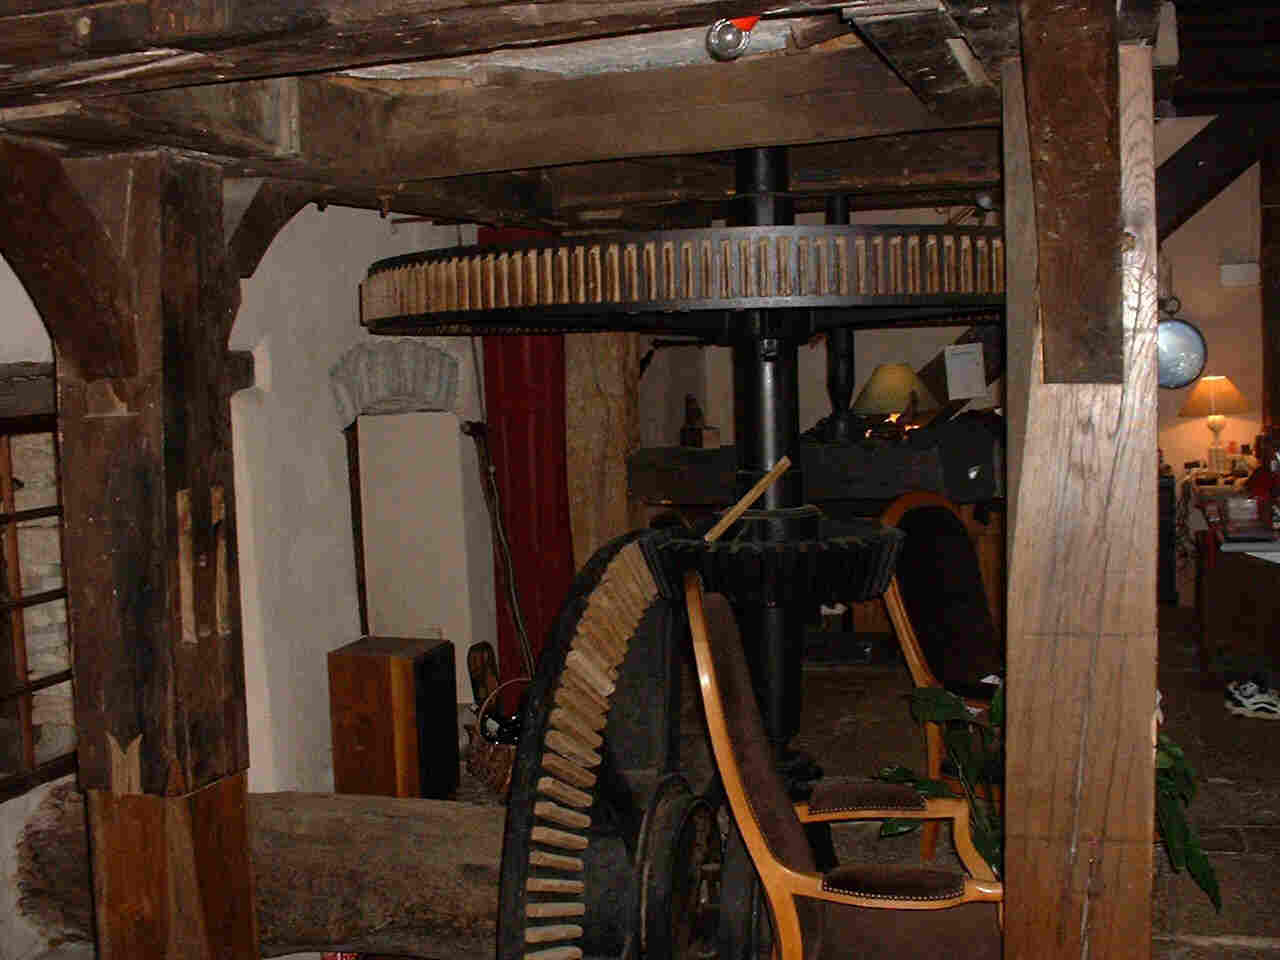 The old mill machinery